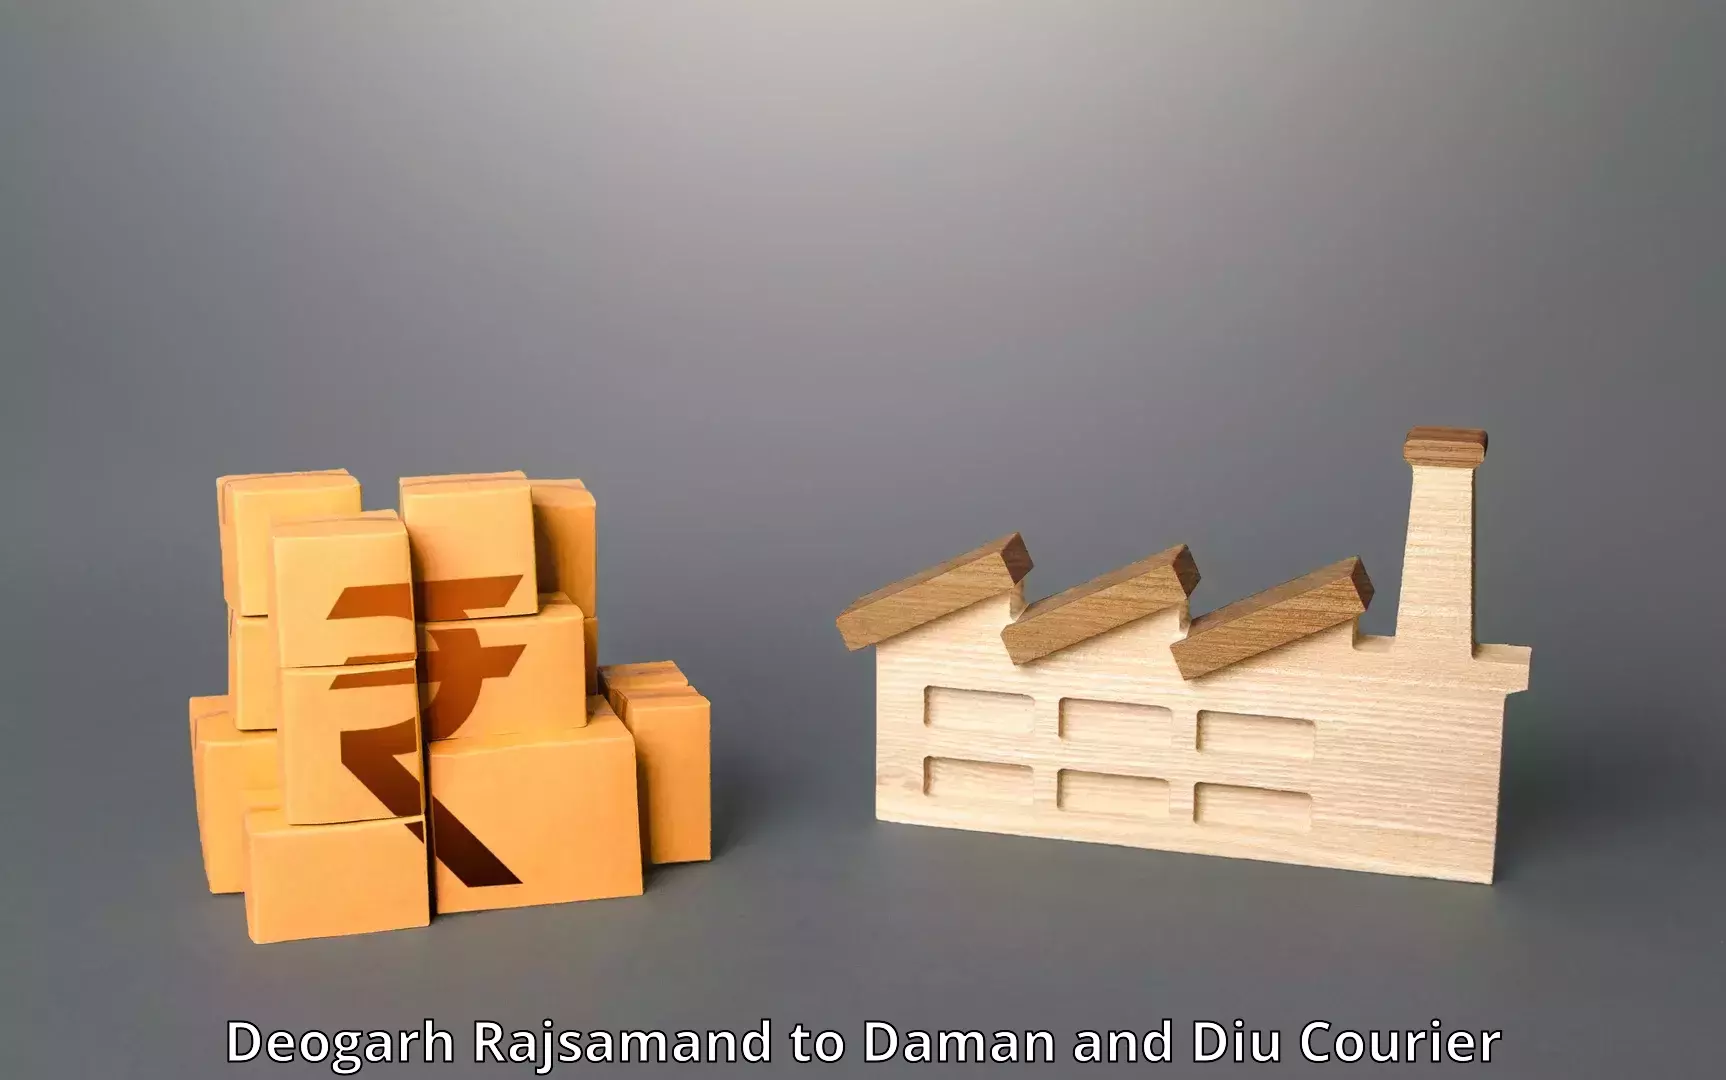 Automated parcel services Deogarh Rajsamand to Daman